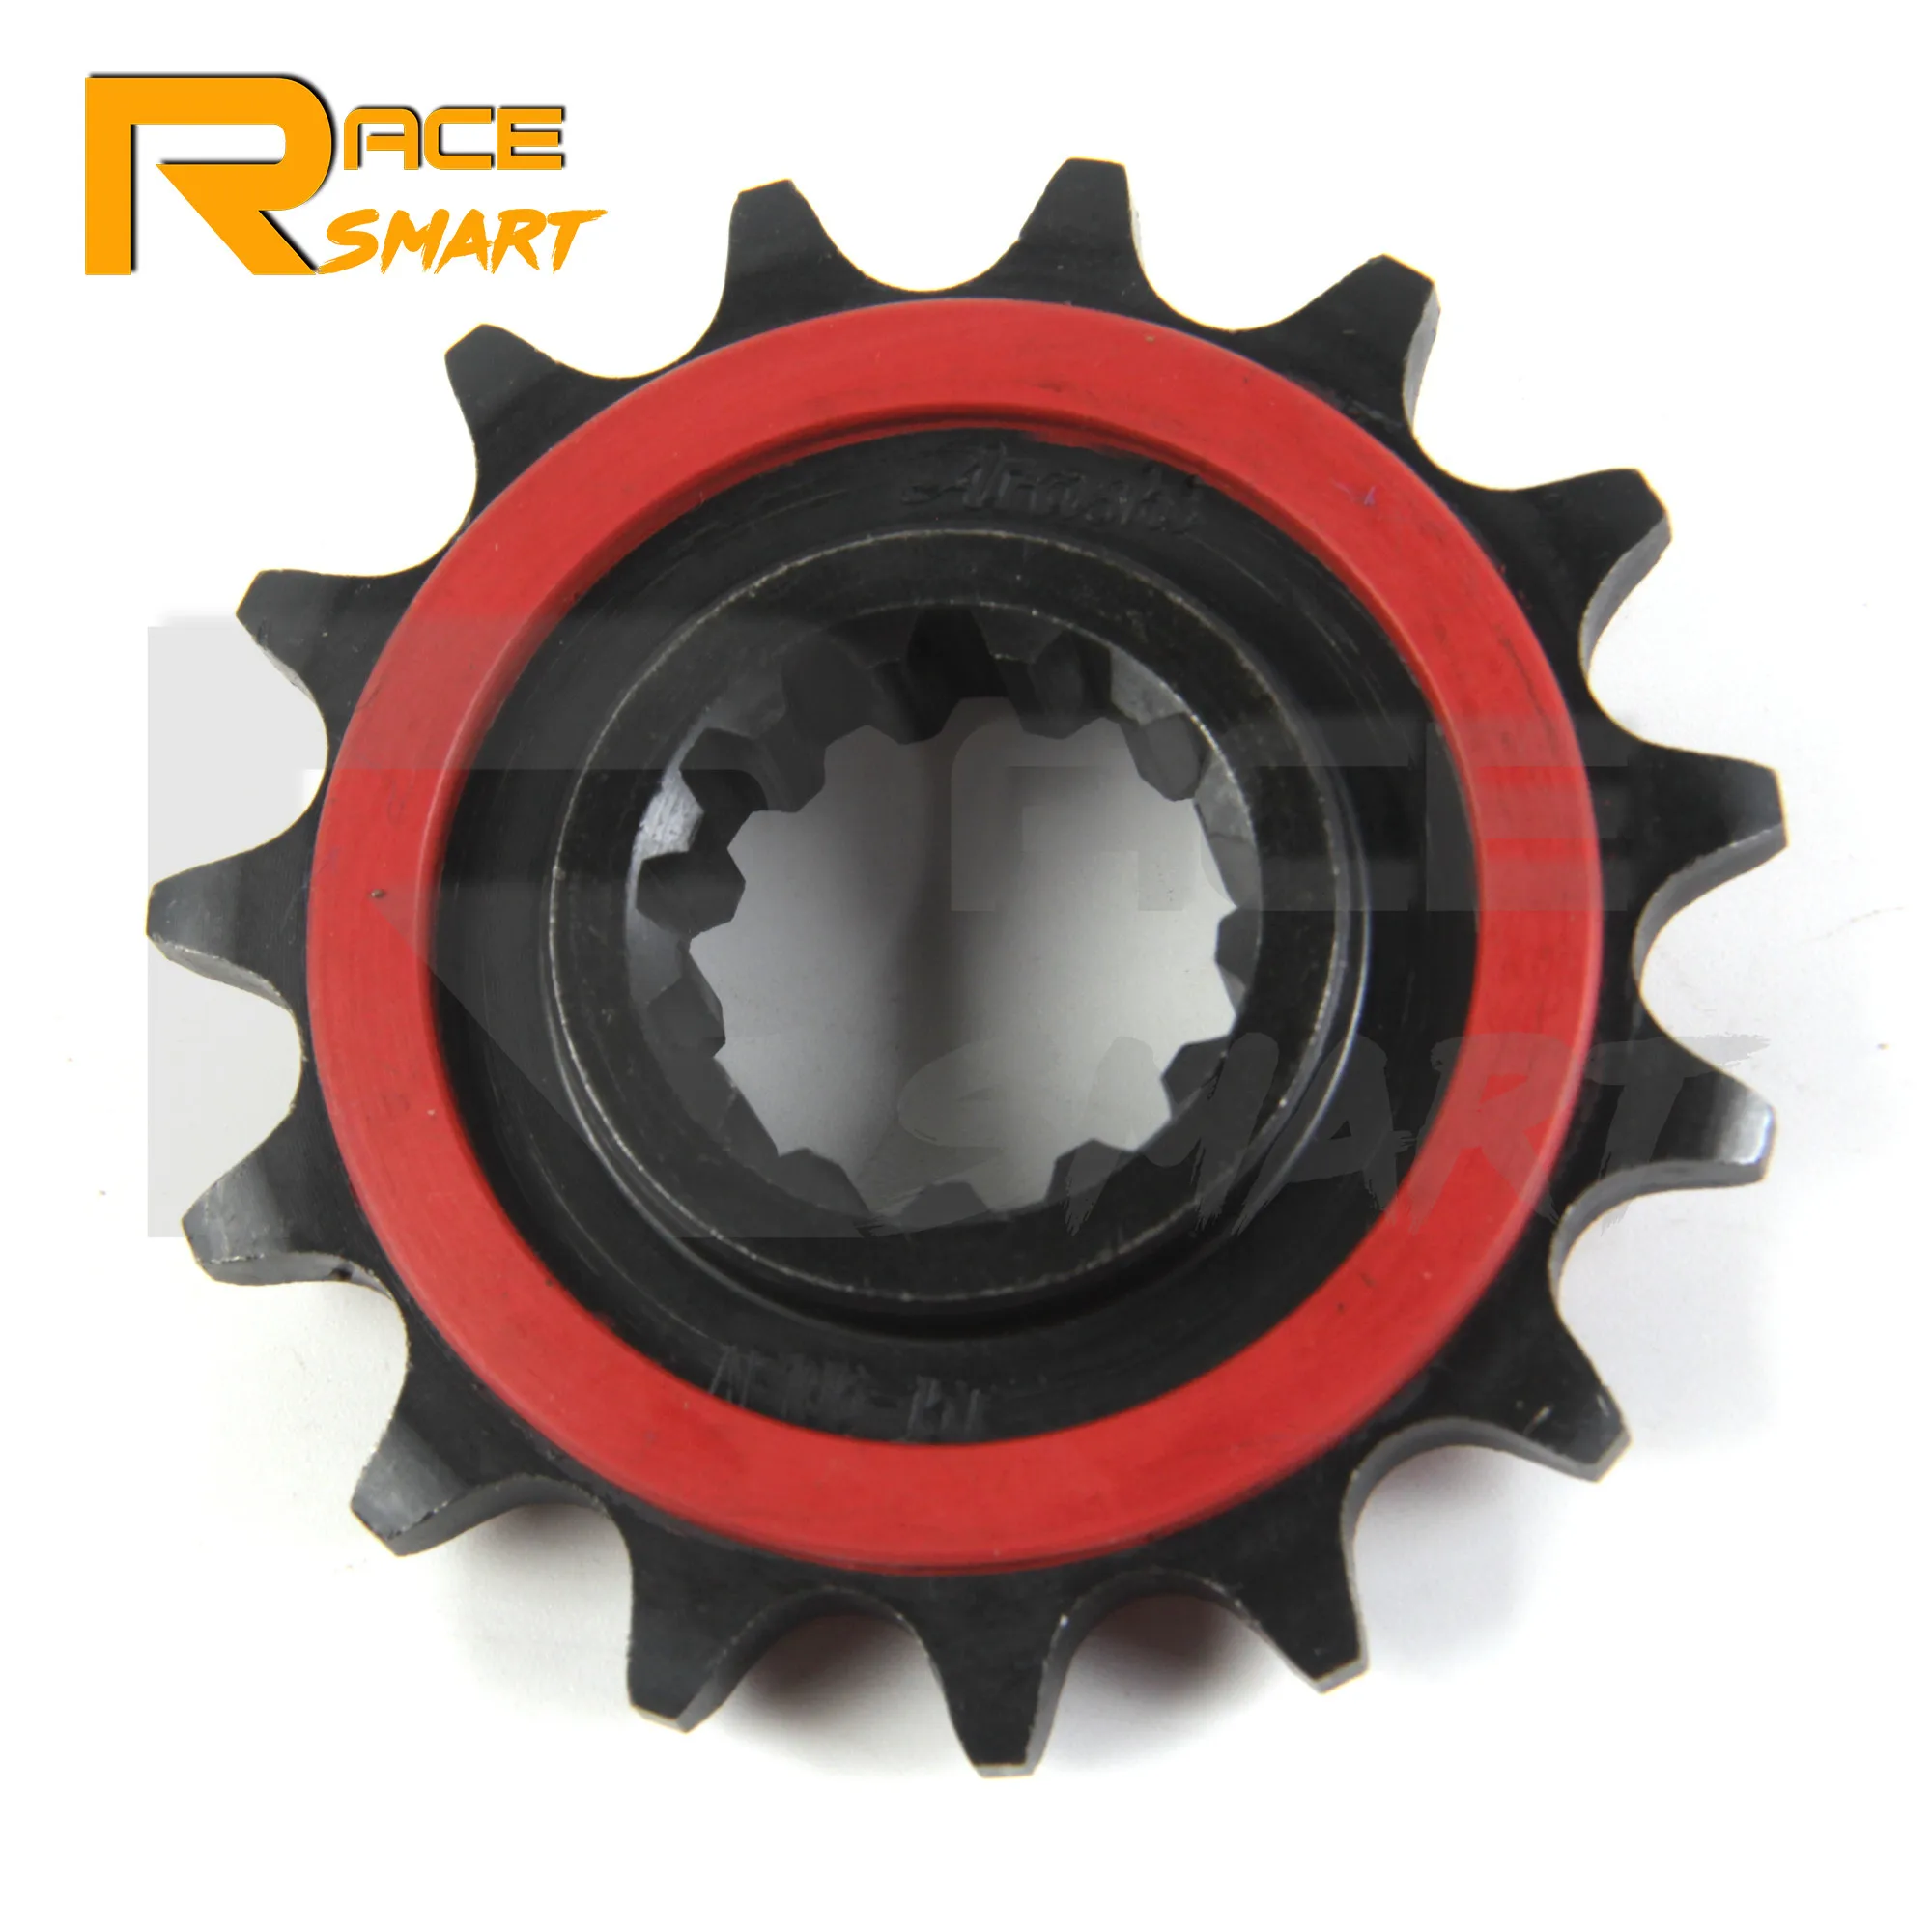 525 chain cbr650 r 2019 2020 motorcycle rubber cushioned front rear sprocket part for honda cbr650f cbr650fa 2014 2018 2015 2016 free global shipping